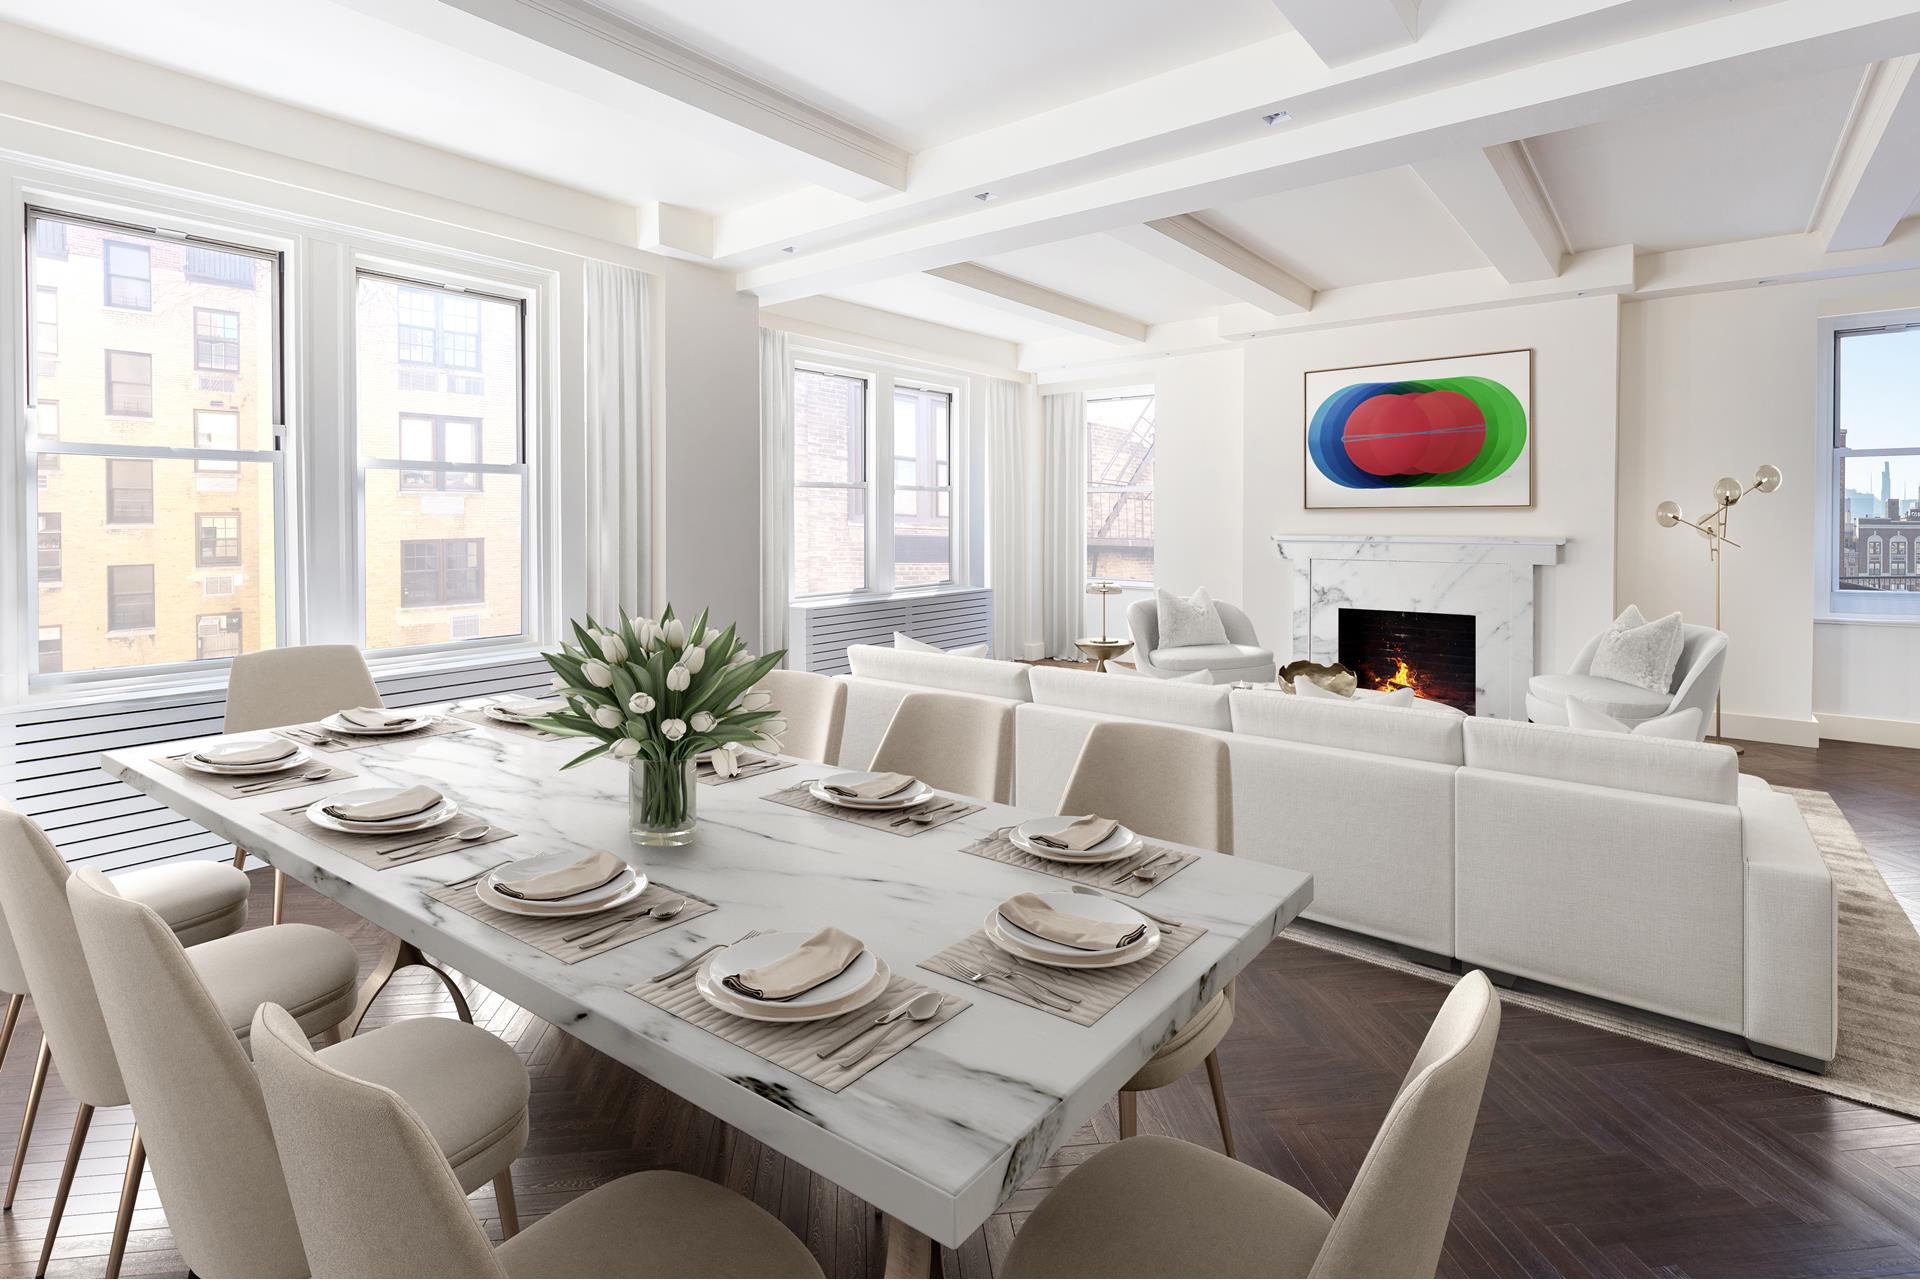 1070 Park Avenue 15E, Carnegie Hill, Upper East Side, NYC - 3 Bedrooms  
3 Bathrooms  
6 Rooms - 